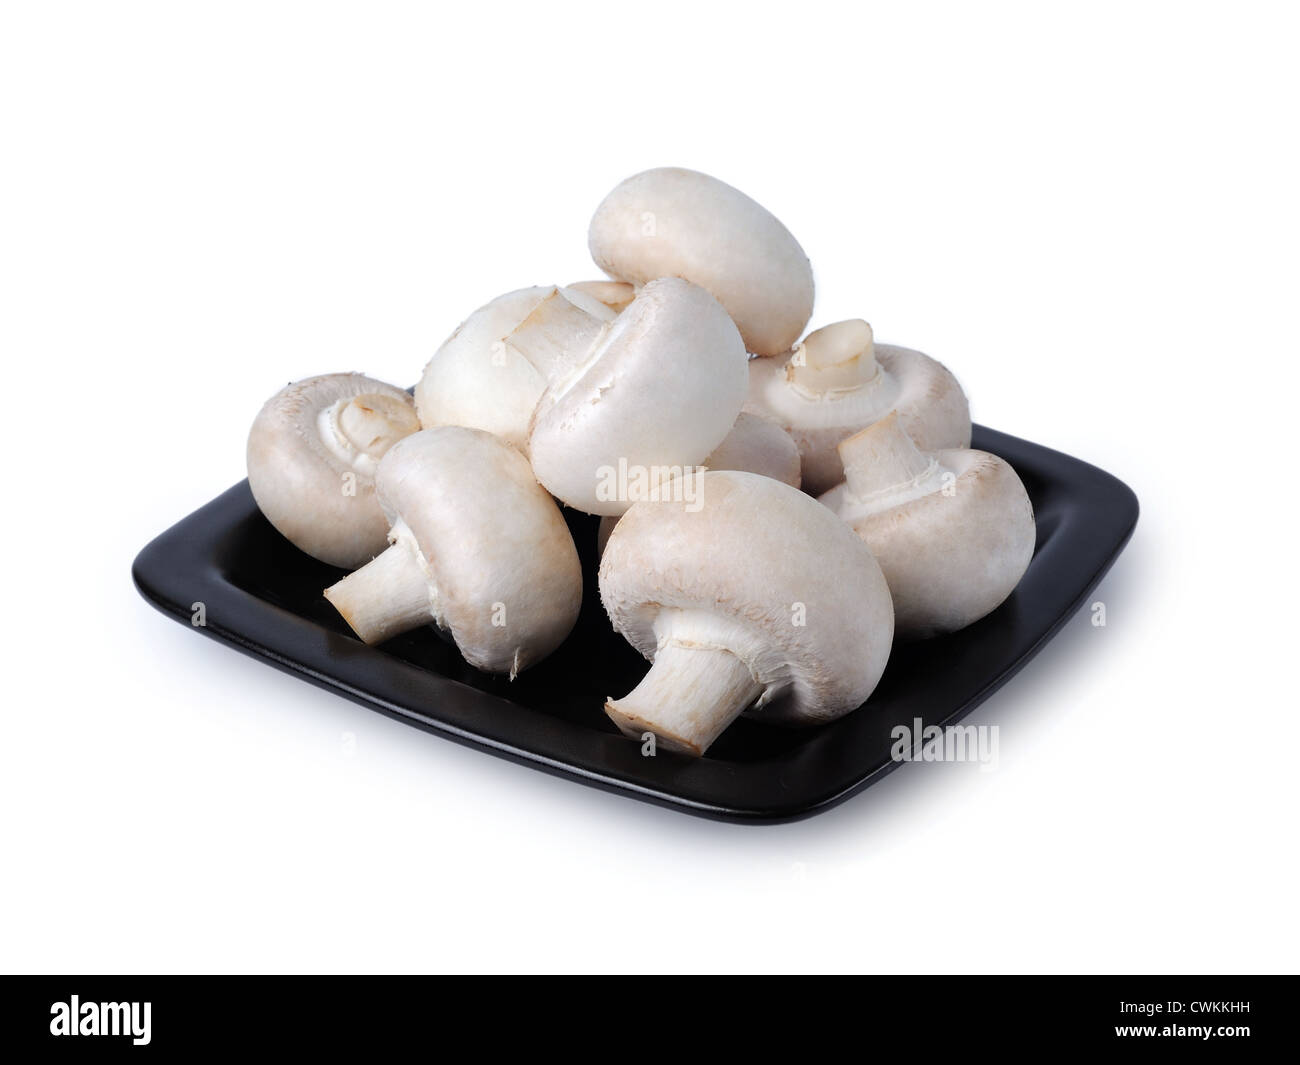 White mushrooms on a black plate isolated on white background Stock Photo